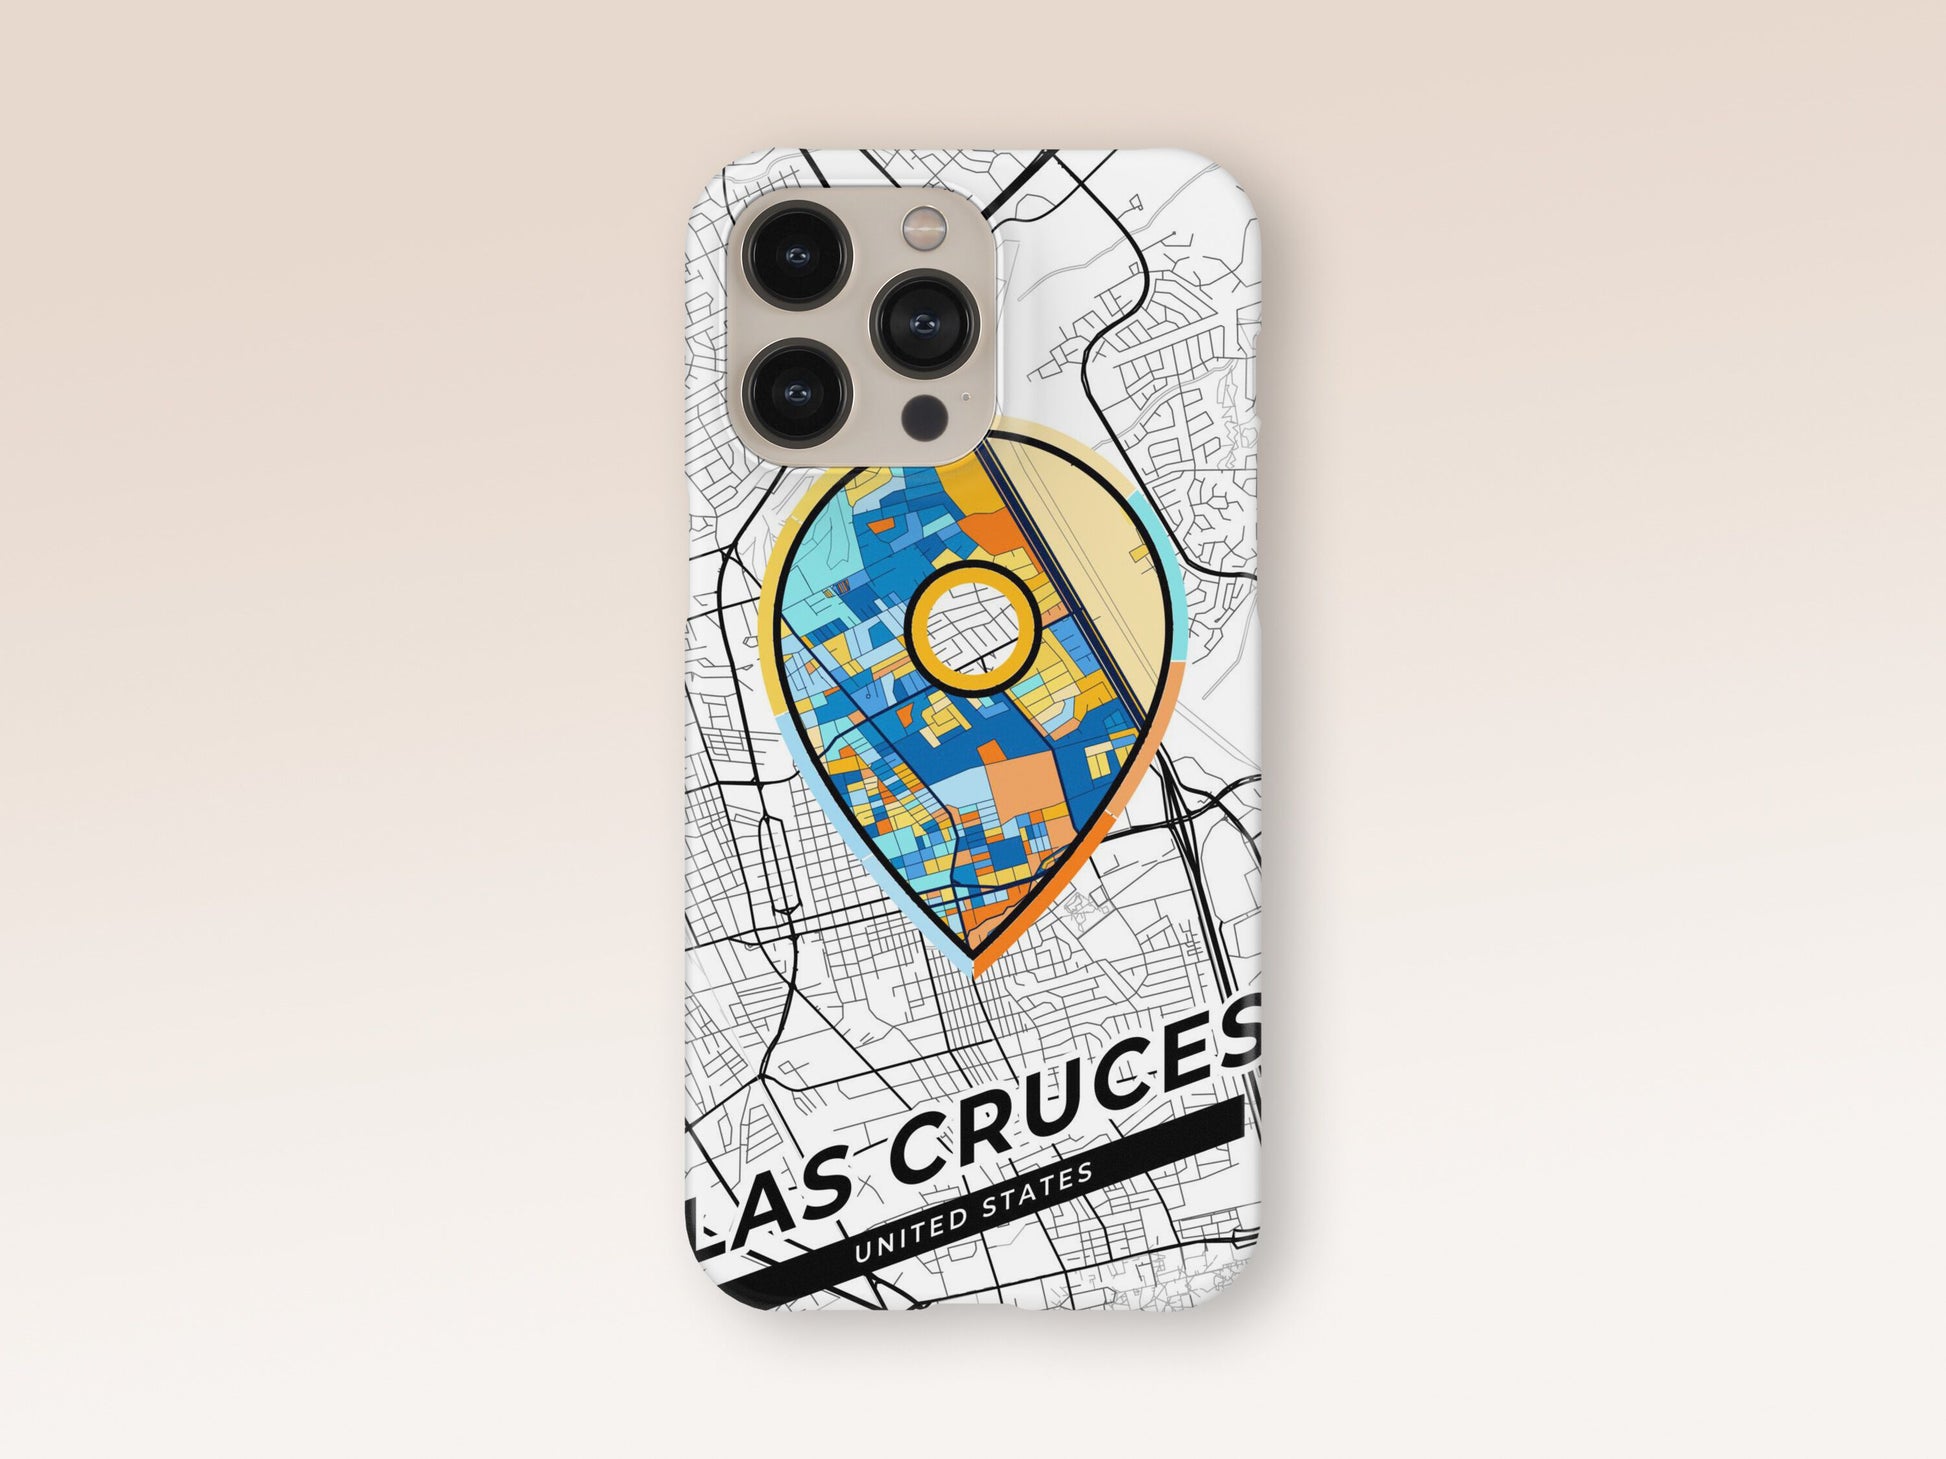 Las Cruces New Mexico slim phone case with colorful icon. Birthday, wedding or housewarming gift. Couple match cases. 1